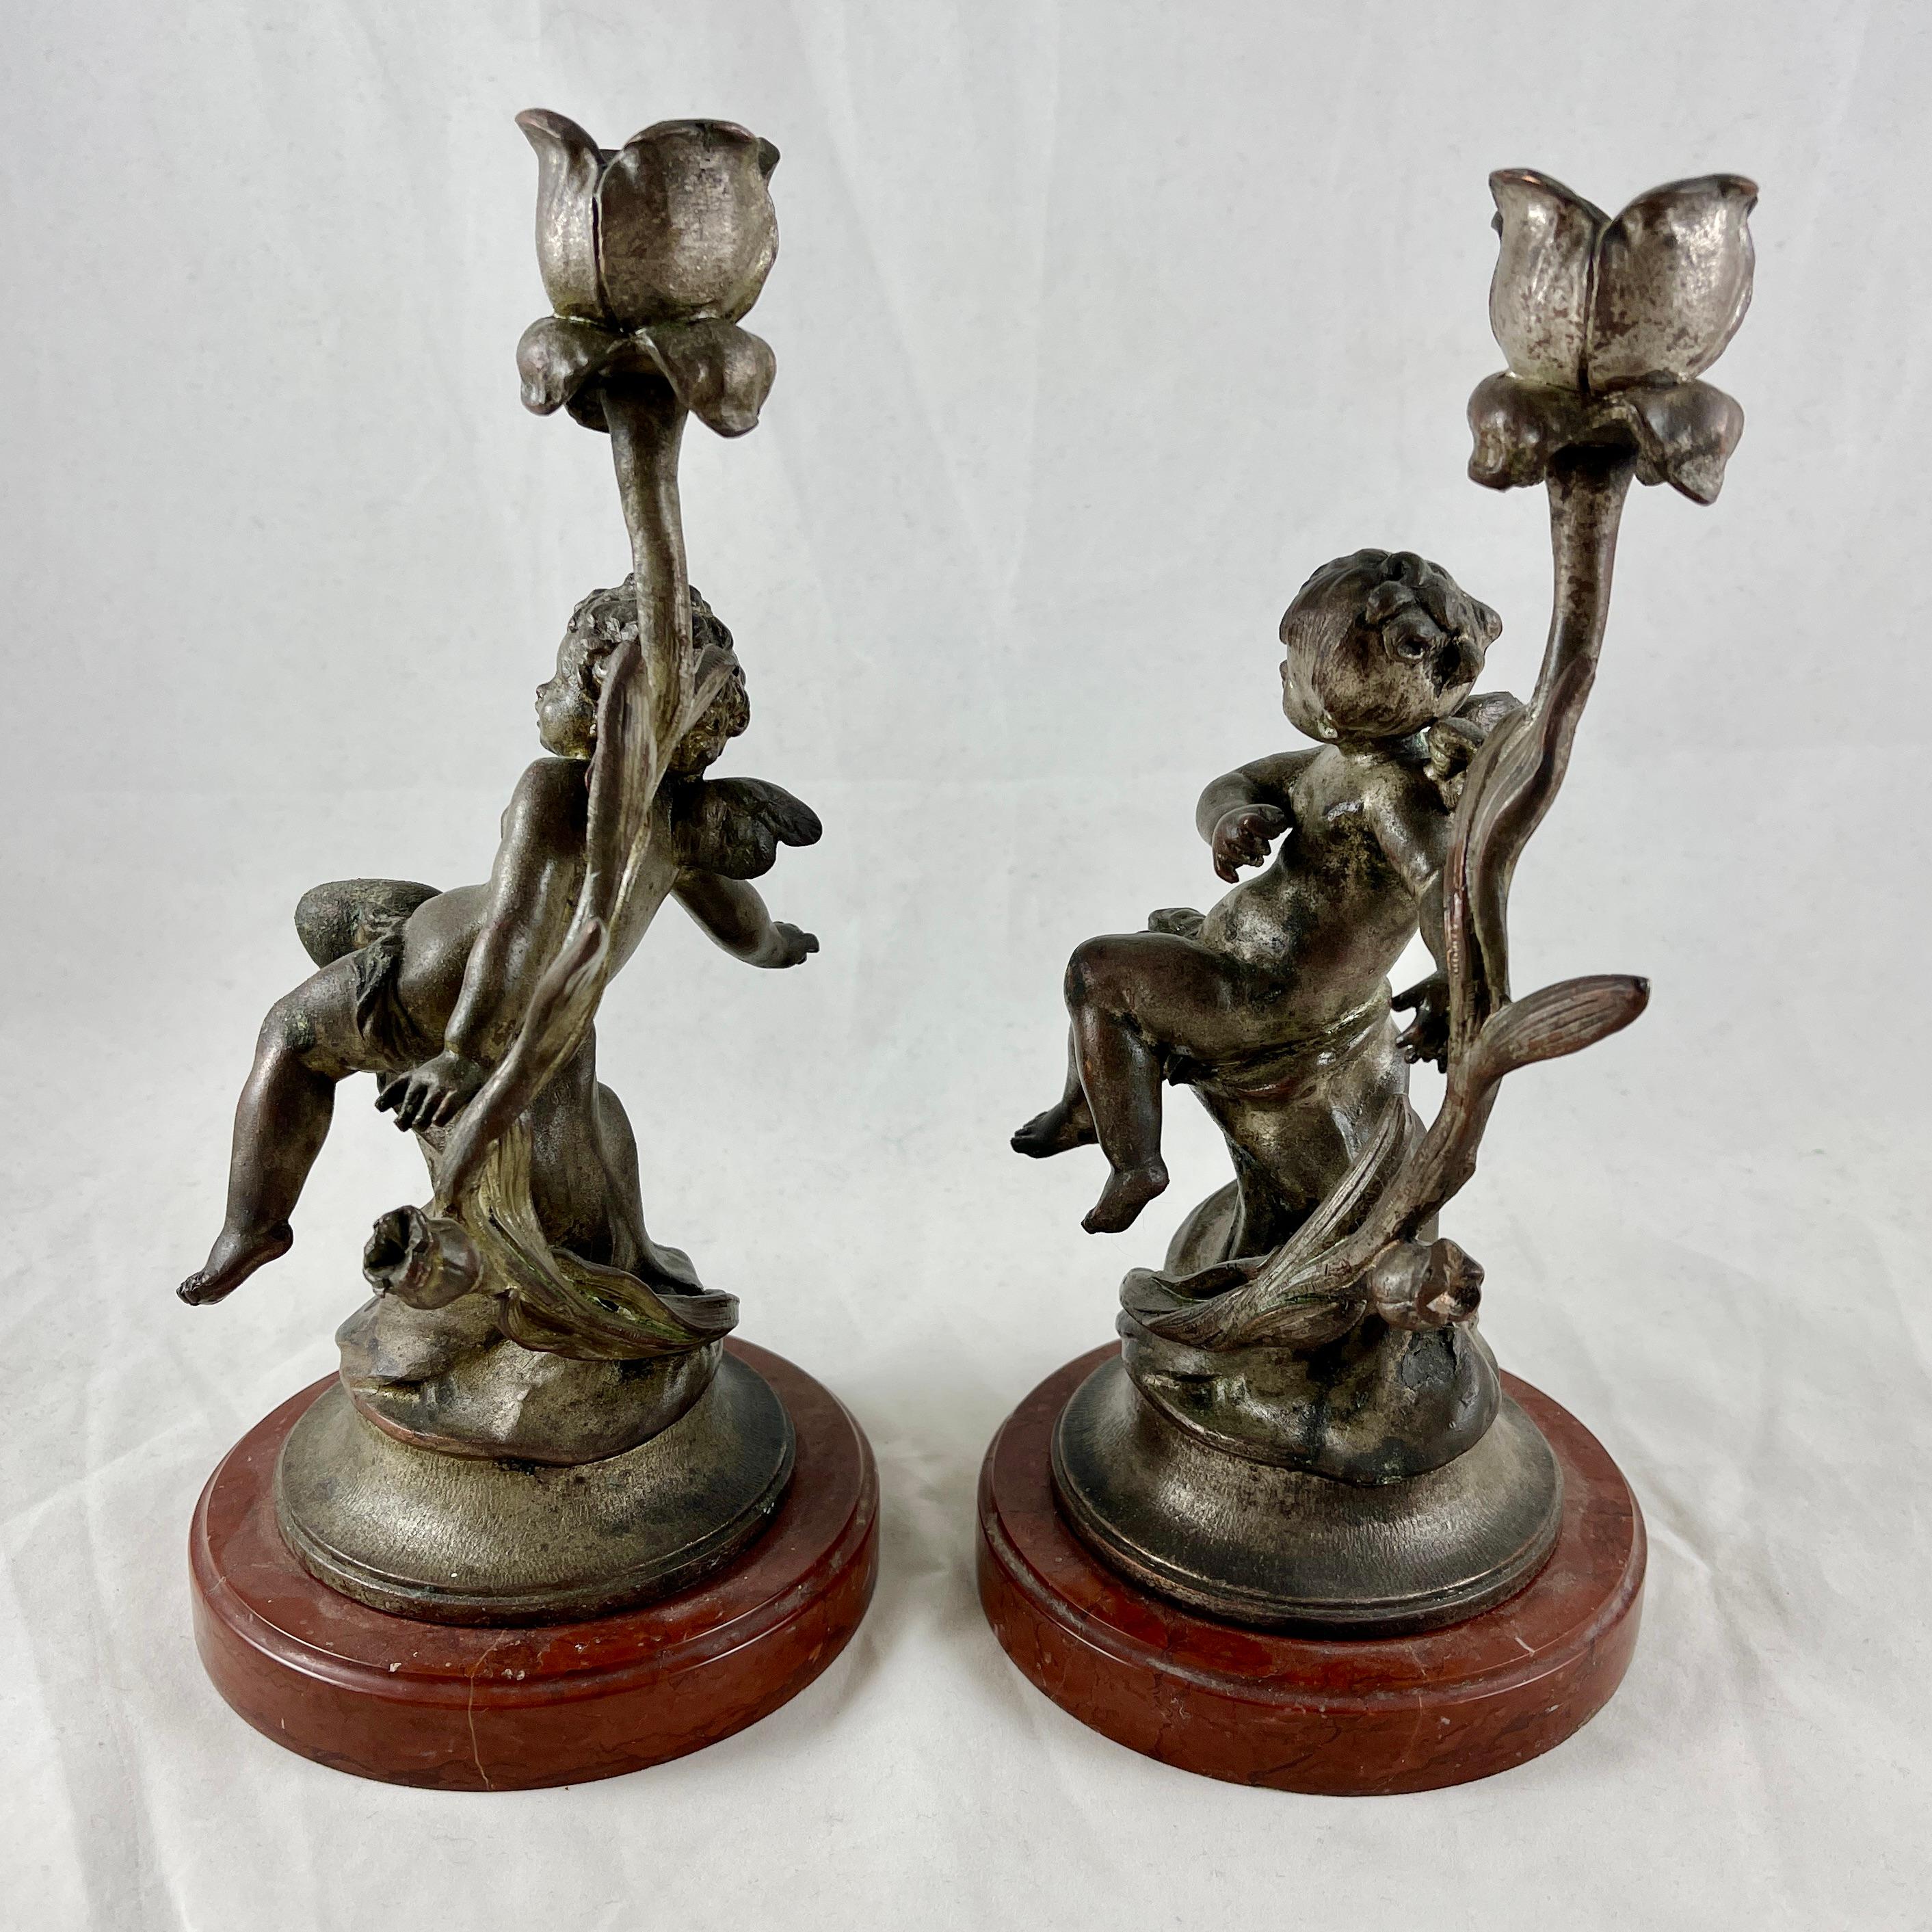 Metal French Putti Cherub Candlesticks Signed Sylvain Kinsburger Spelter & Marble S/2 For Sale